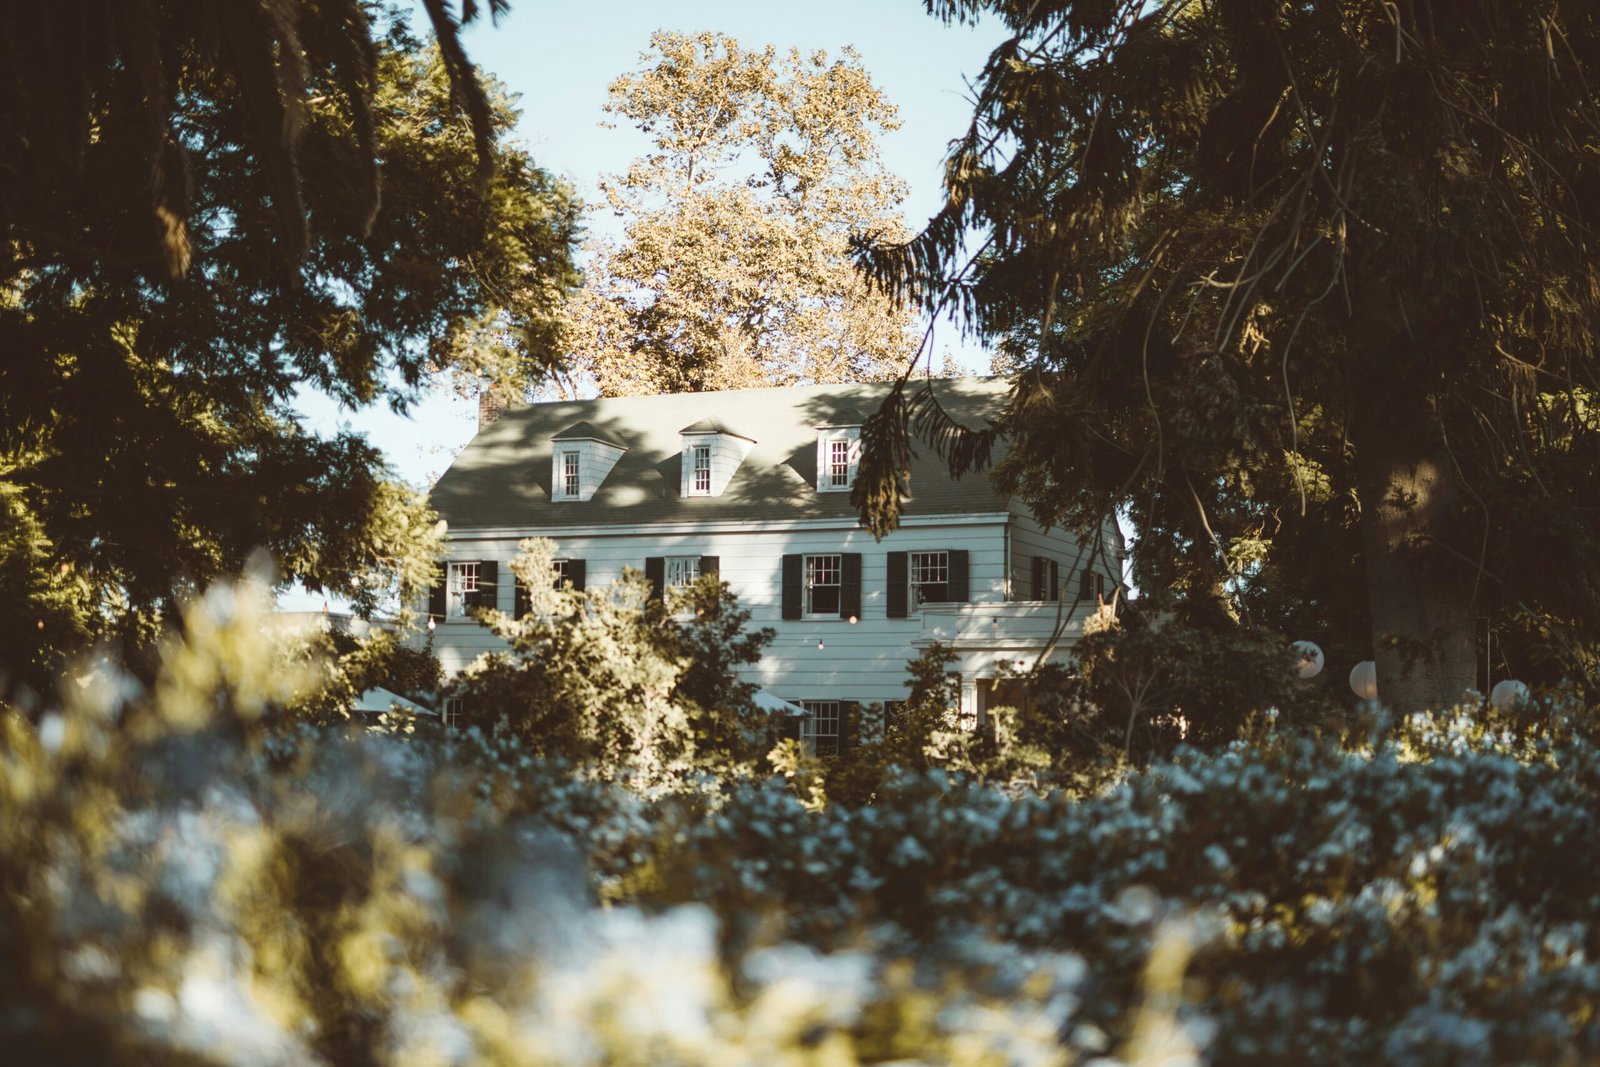 Vintage home surrounded by trees